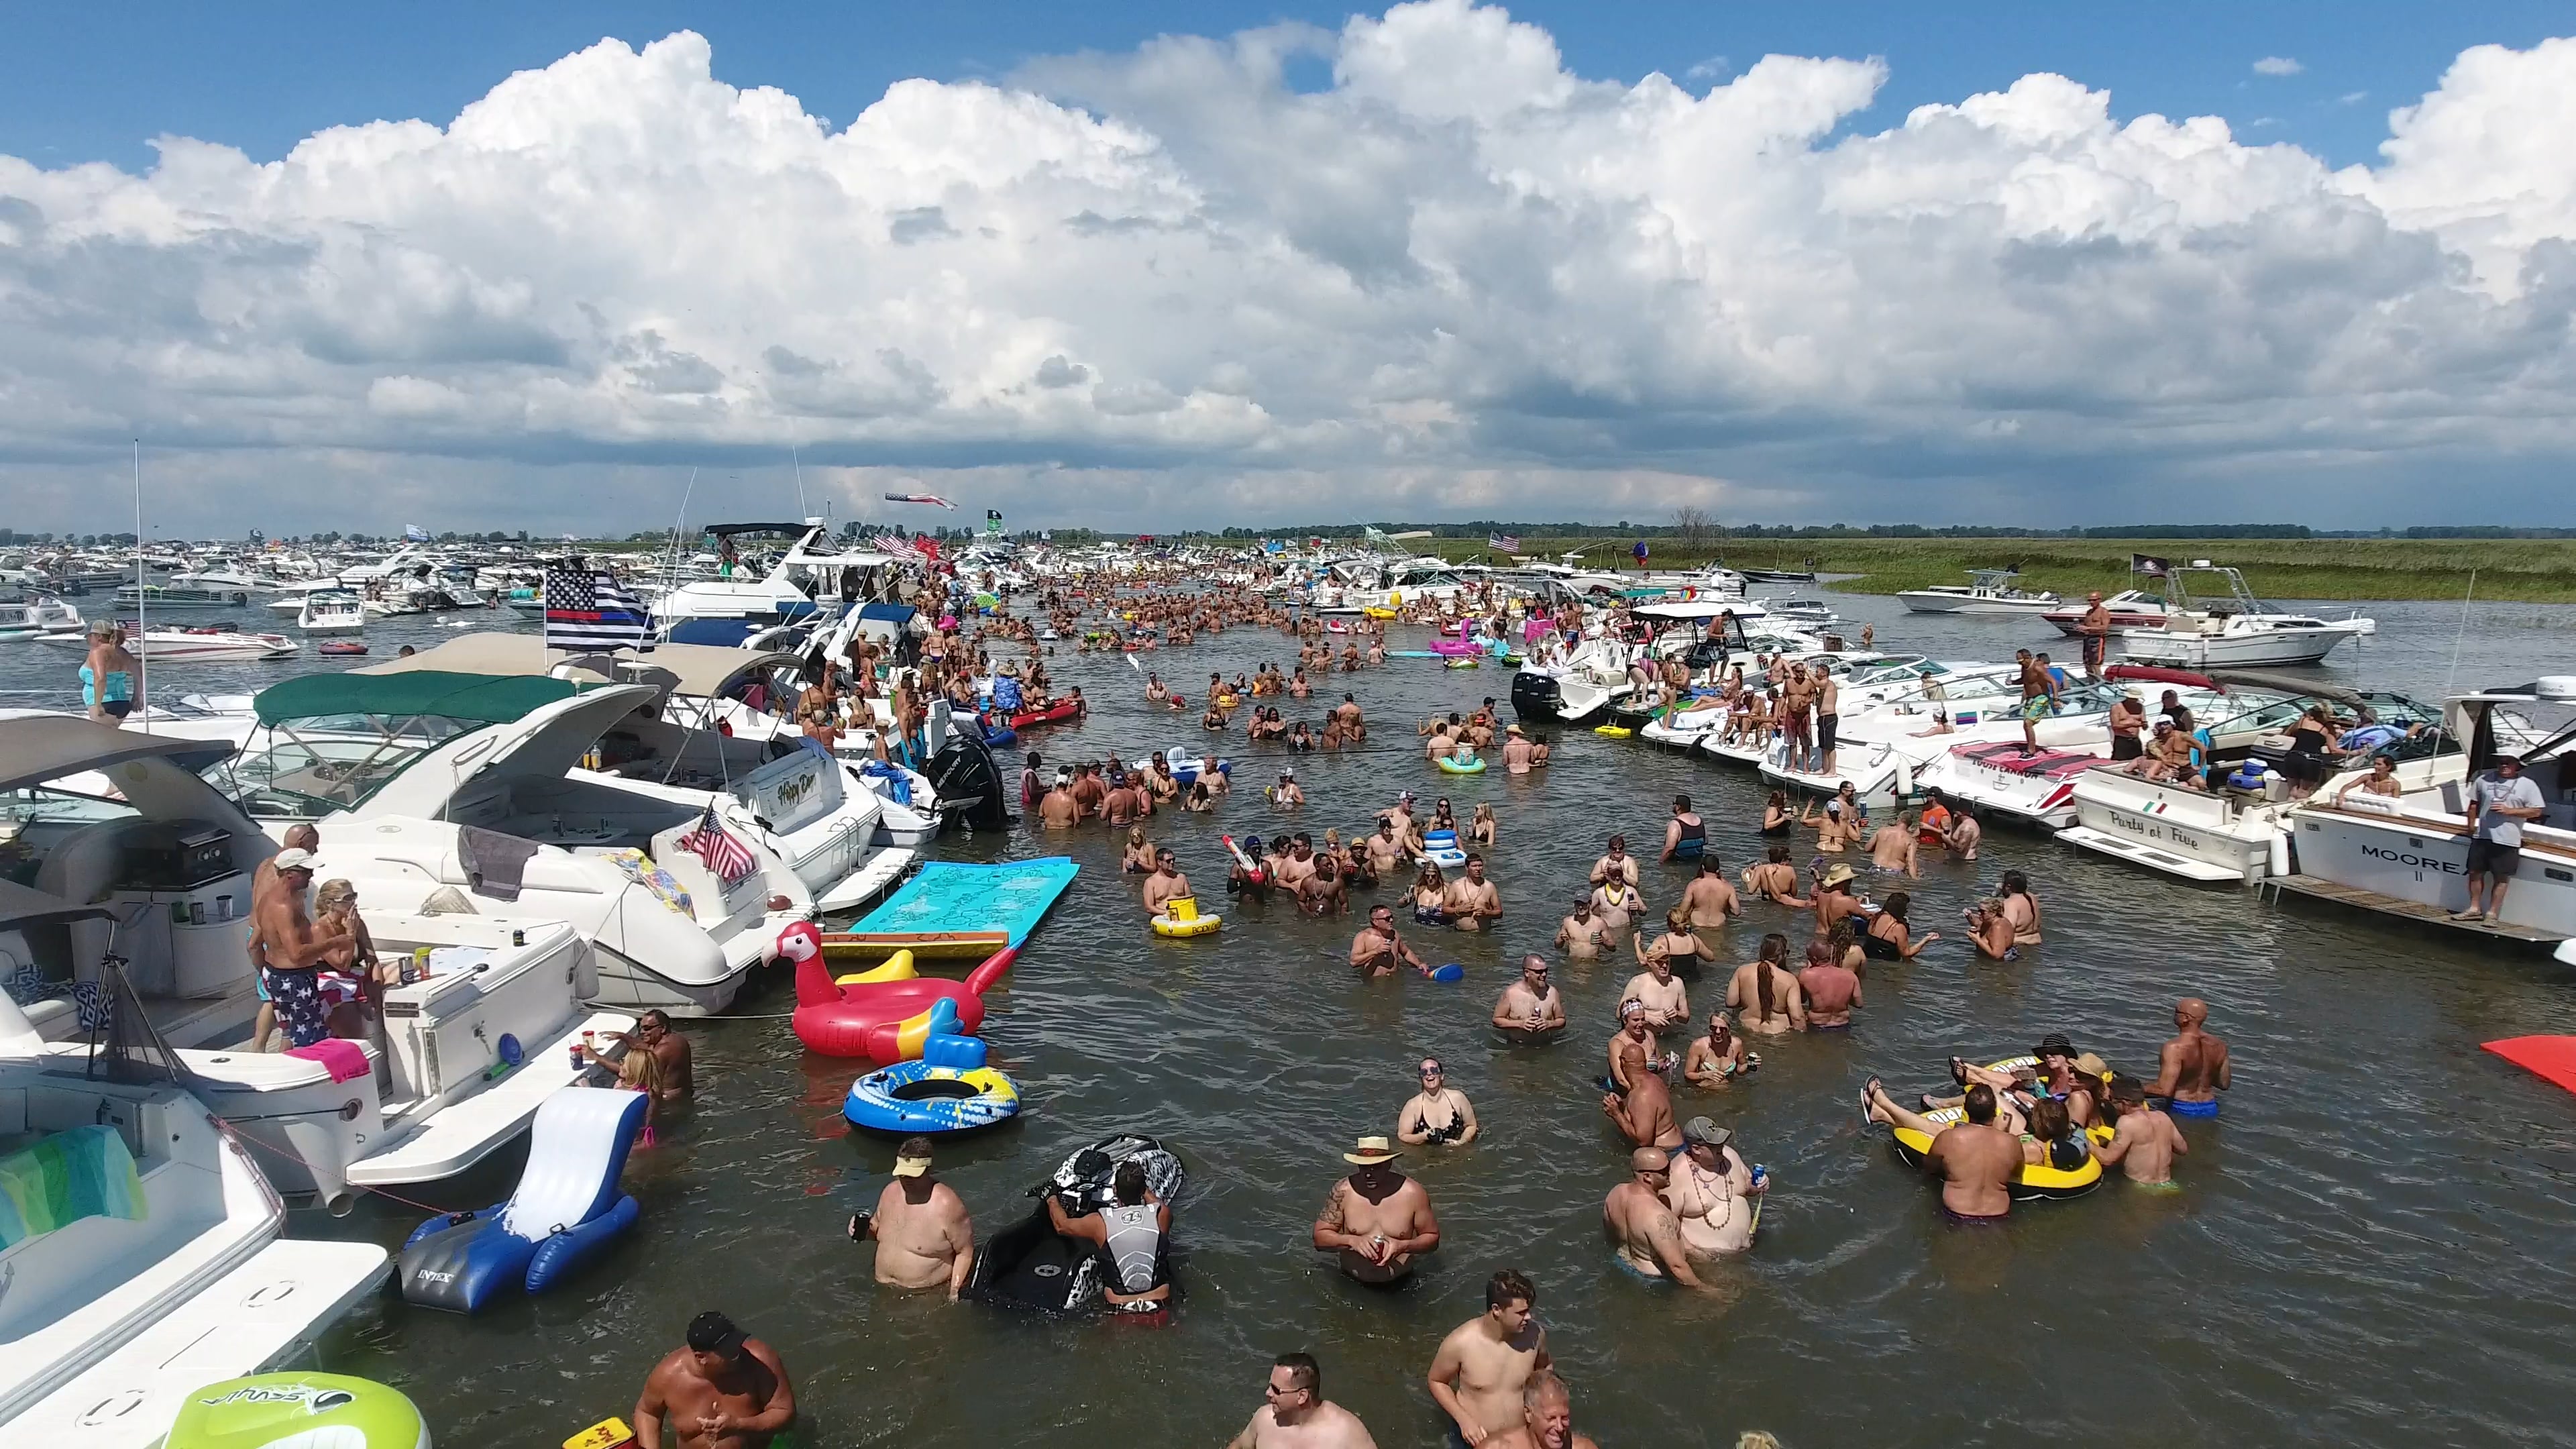 Raft Off 2017 Lake St. Clair Muscamoot Bay 2 on Vimeo